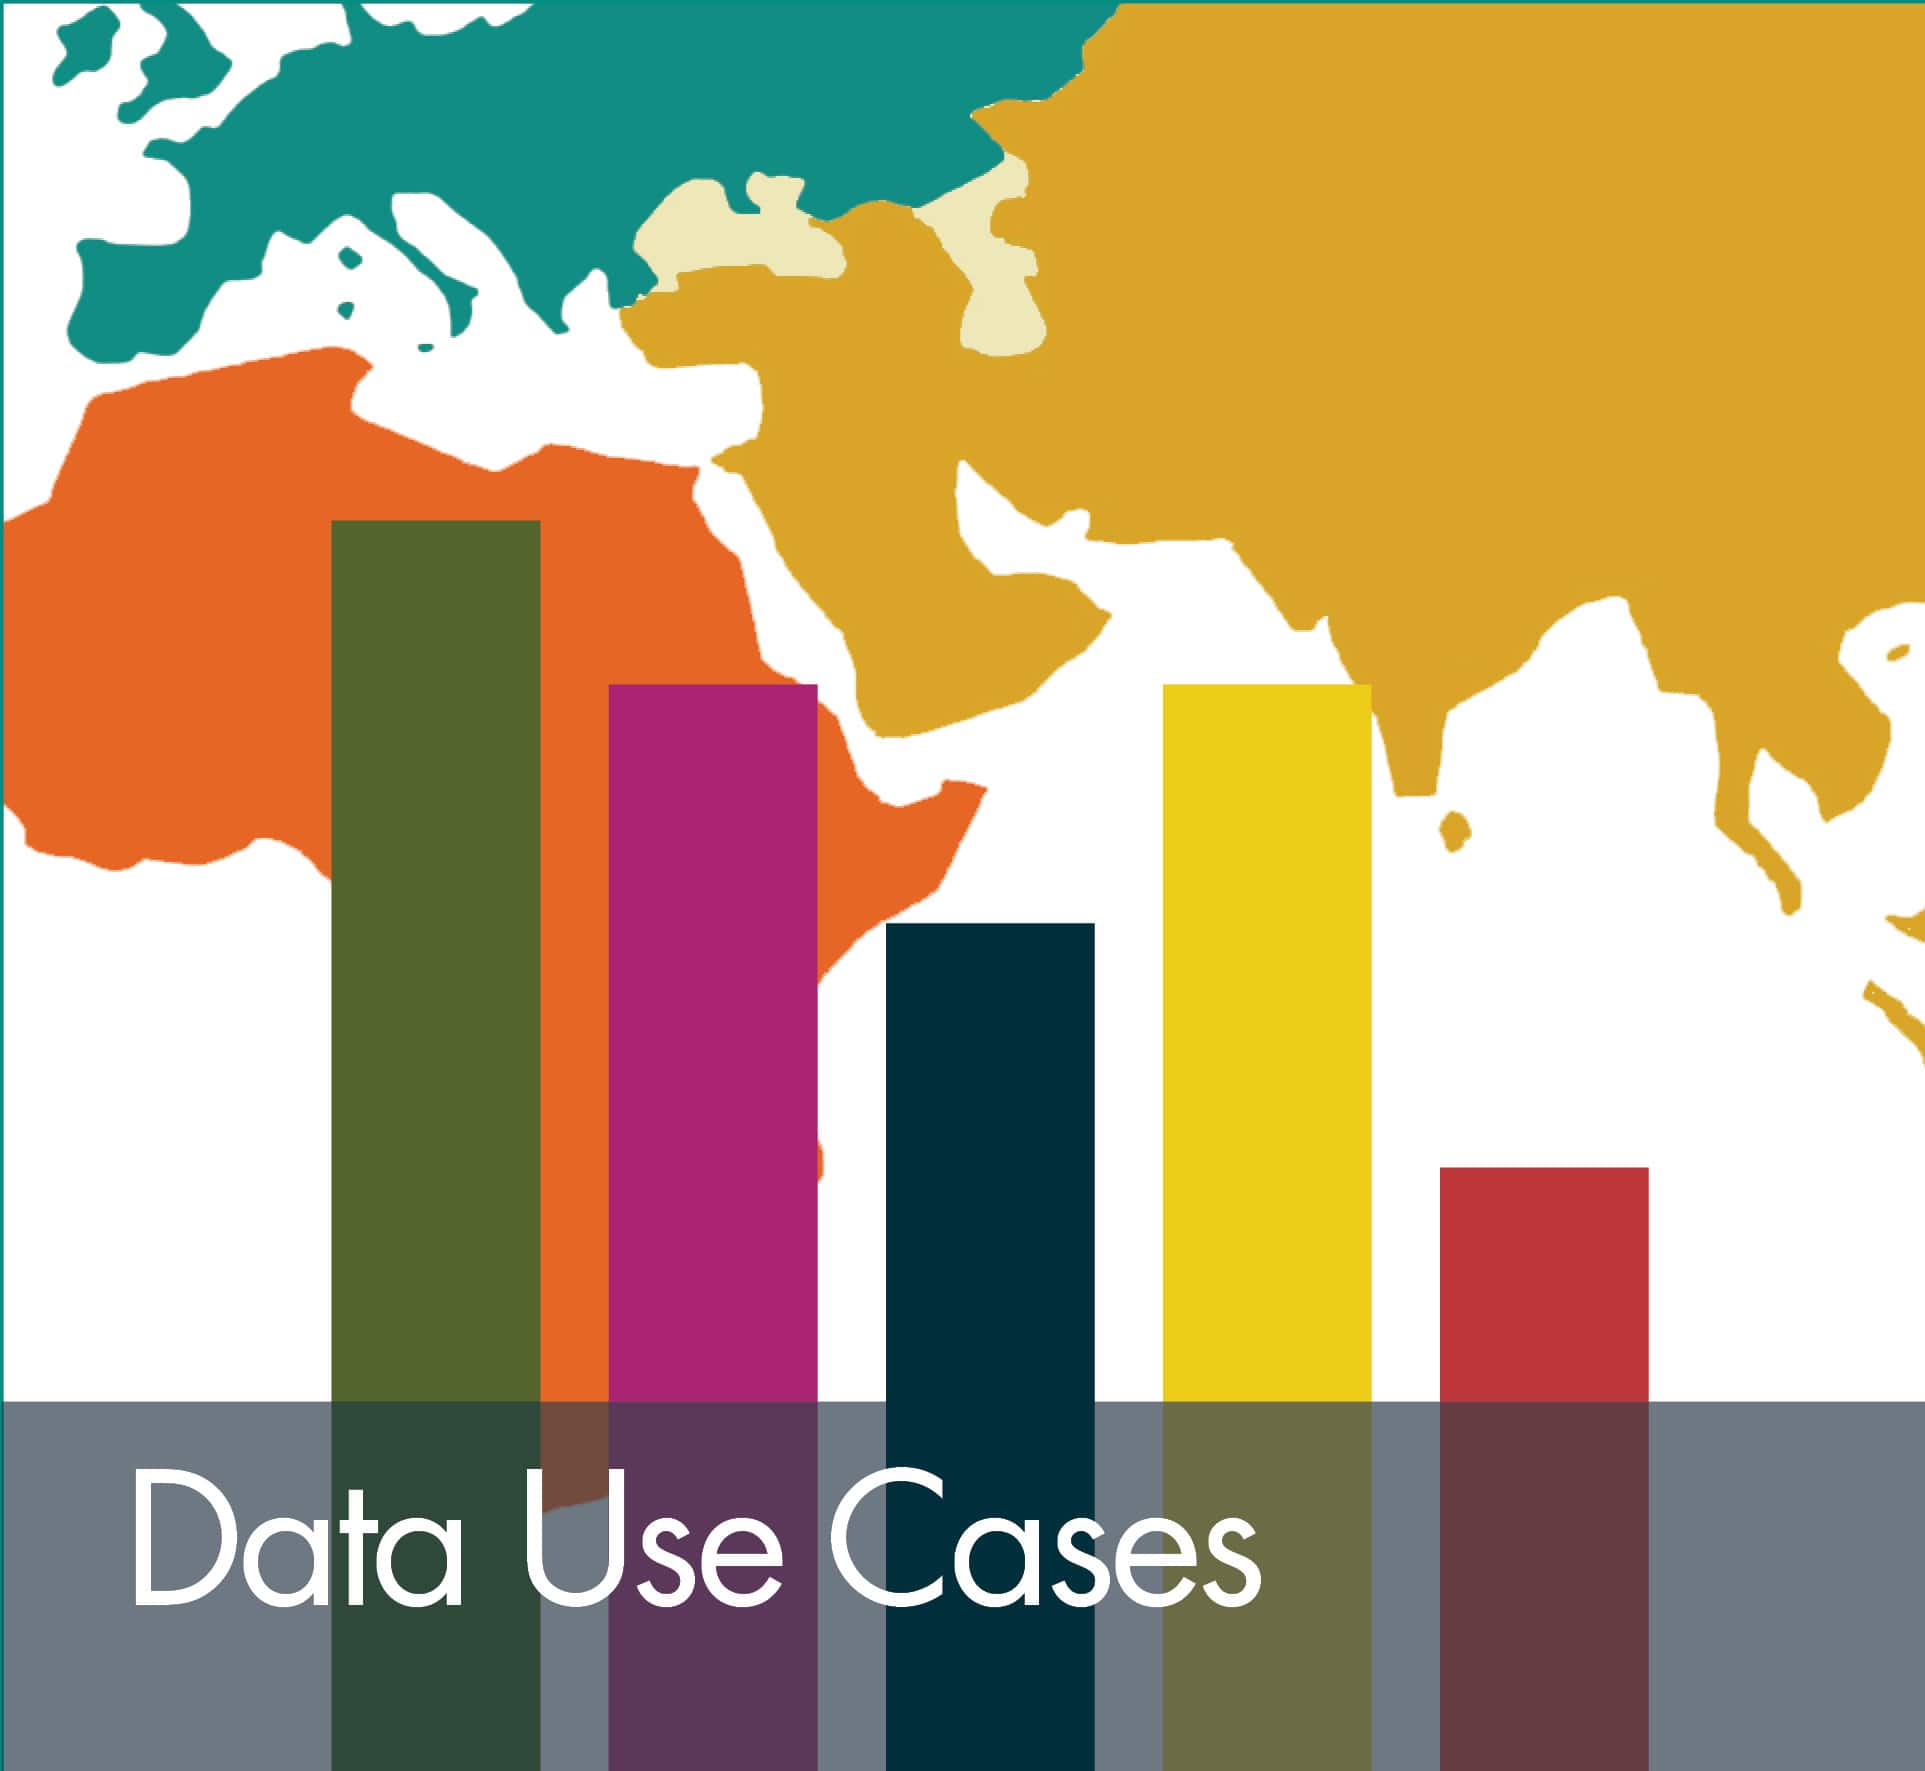 Data Use Cases